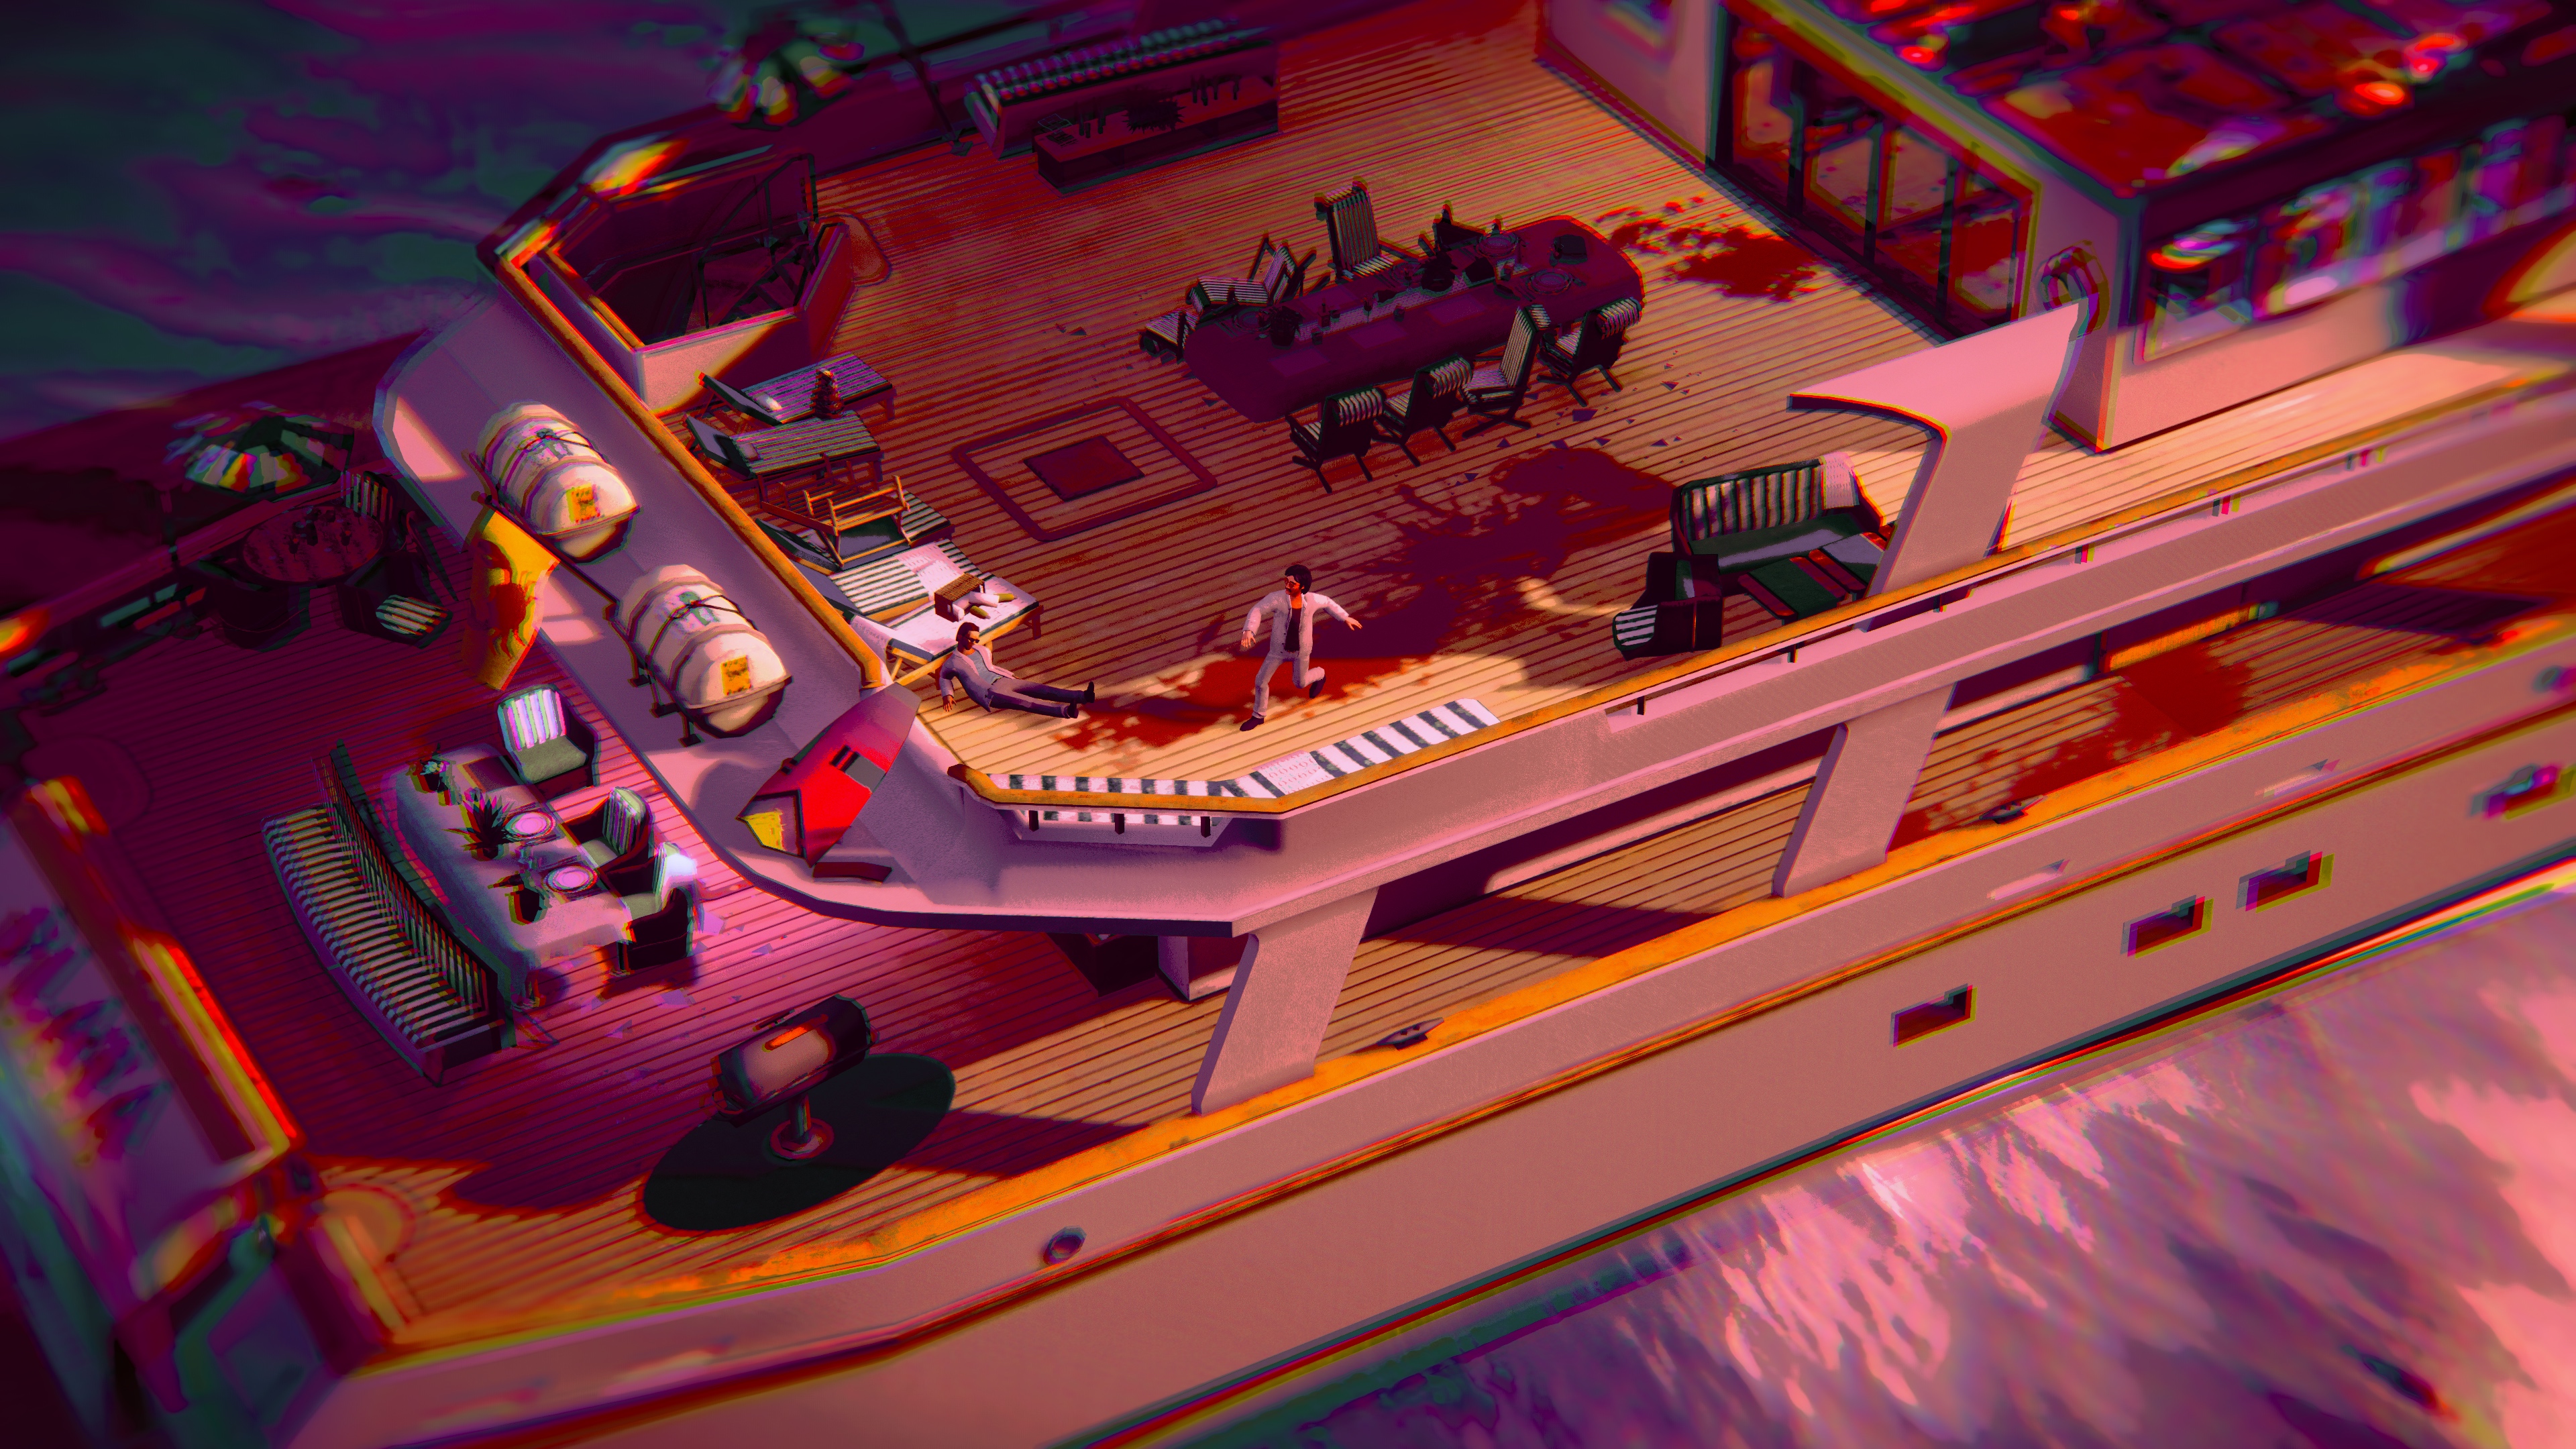 A screenshot of Serial Cleaners showing a blood-spattered yacht